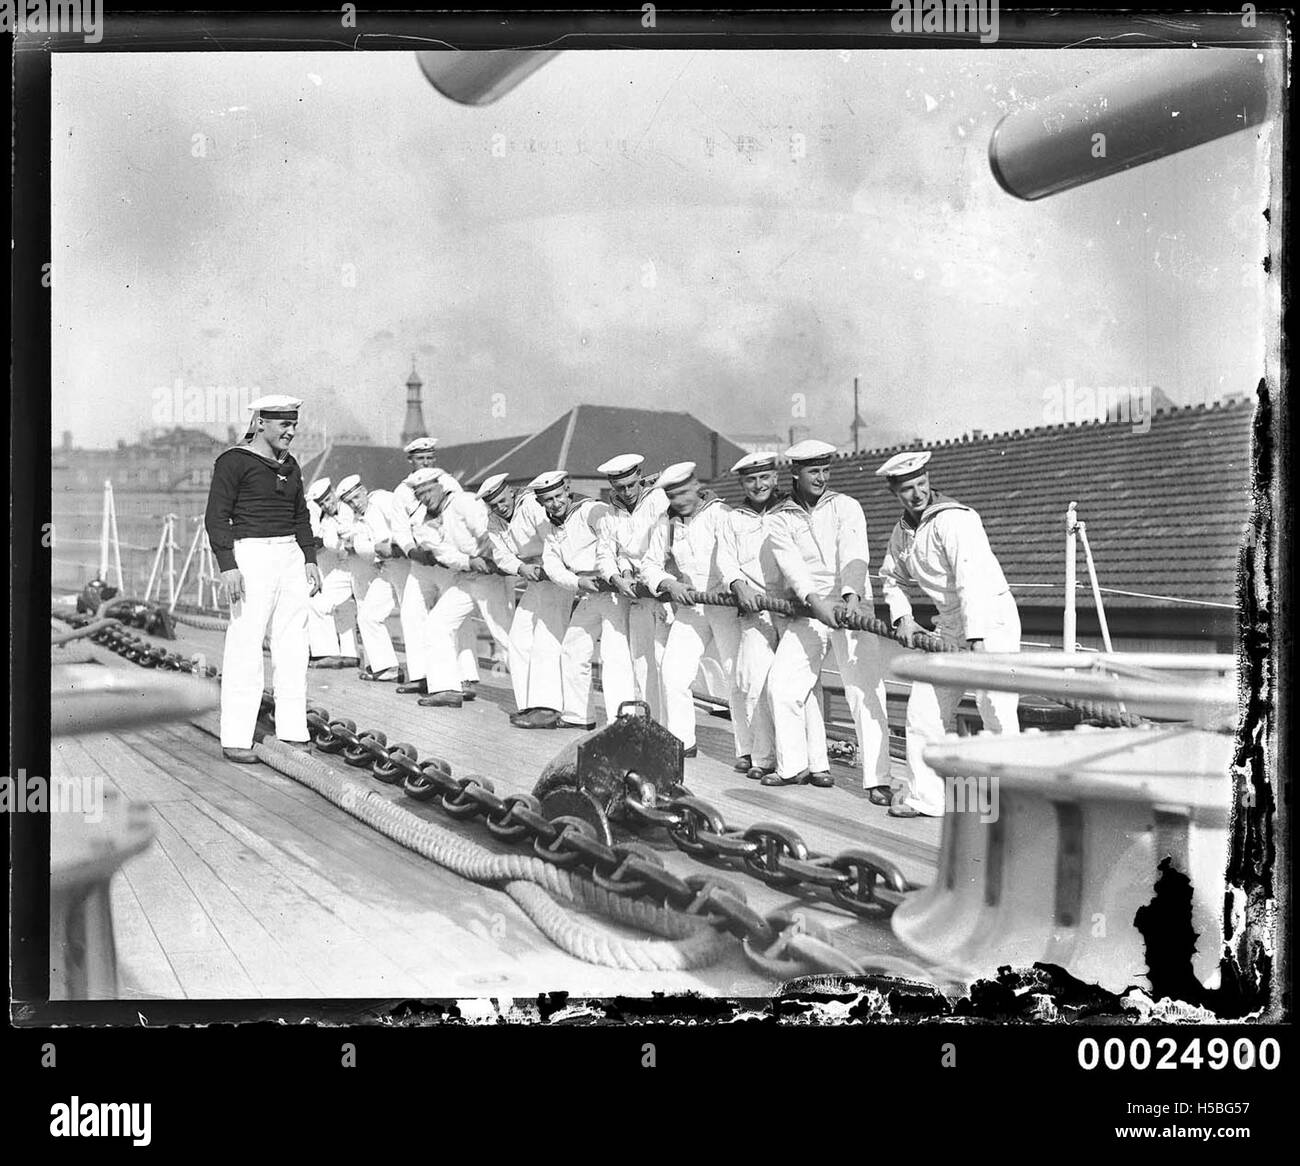 German naval sailors pulling on a rope, tug o' war style, on aft deck of KOLN Stock Photo